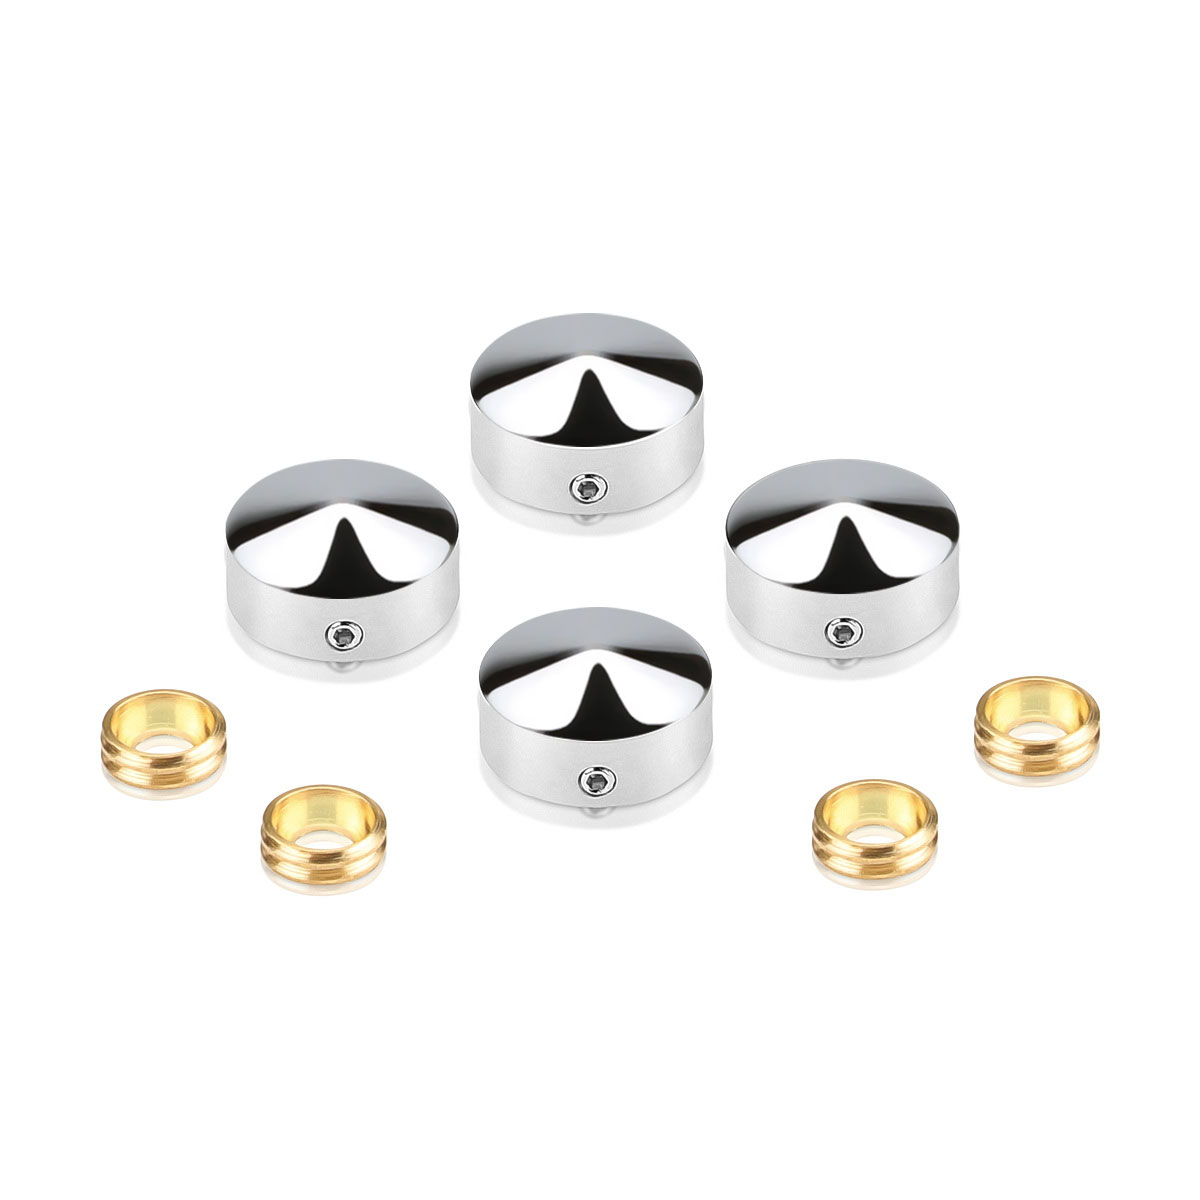 Set of 4 Conical Locking Screw Cover Diameter 11/16'', Polished Stainless Steel Finish (Indoor or Outdoor)